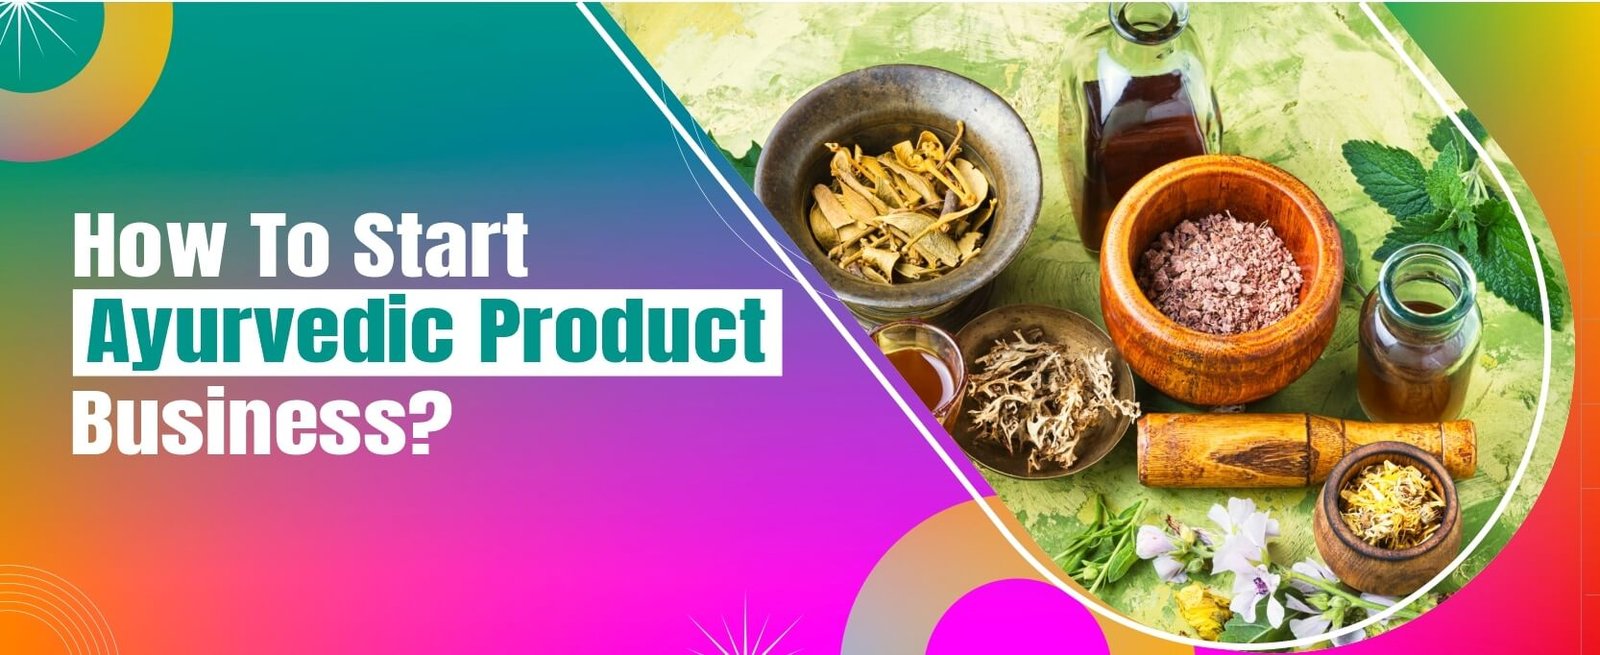 How To Start Ayurvedic Product Business